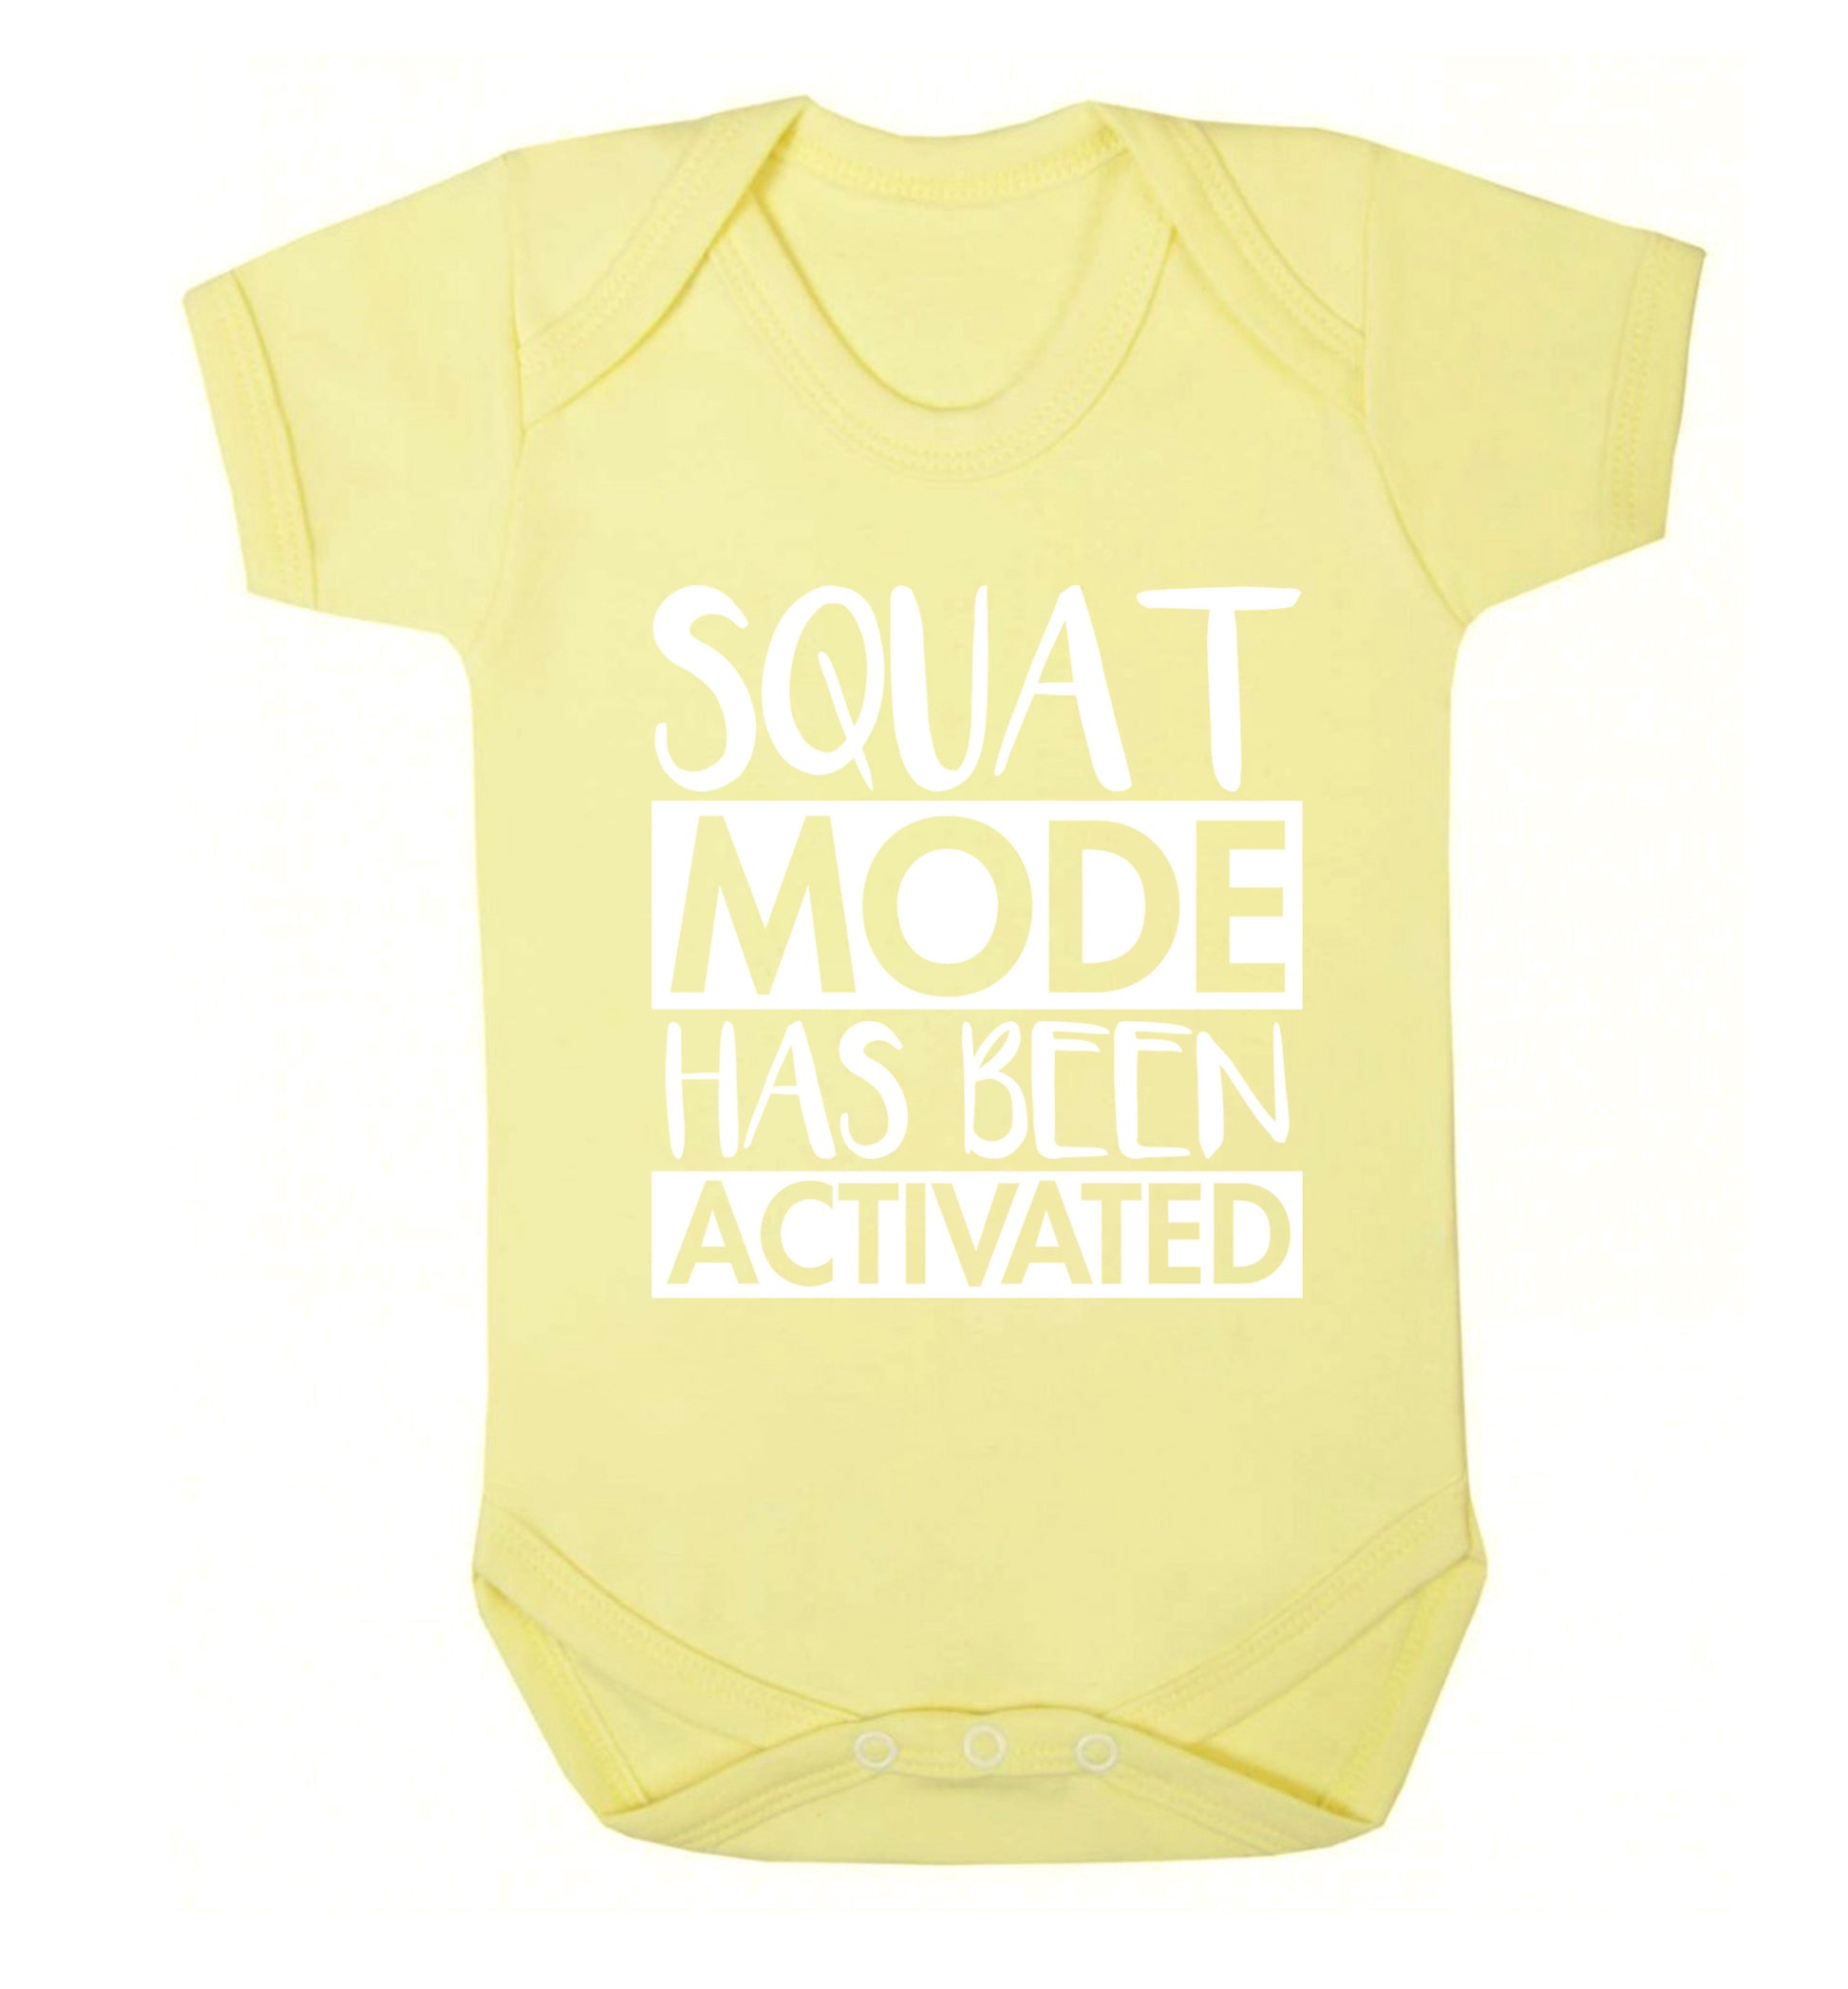 Squat mode activated Baby Vest pale yellow 18-24 months